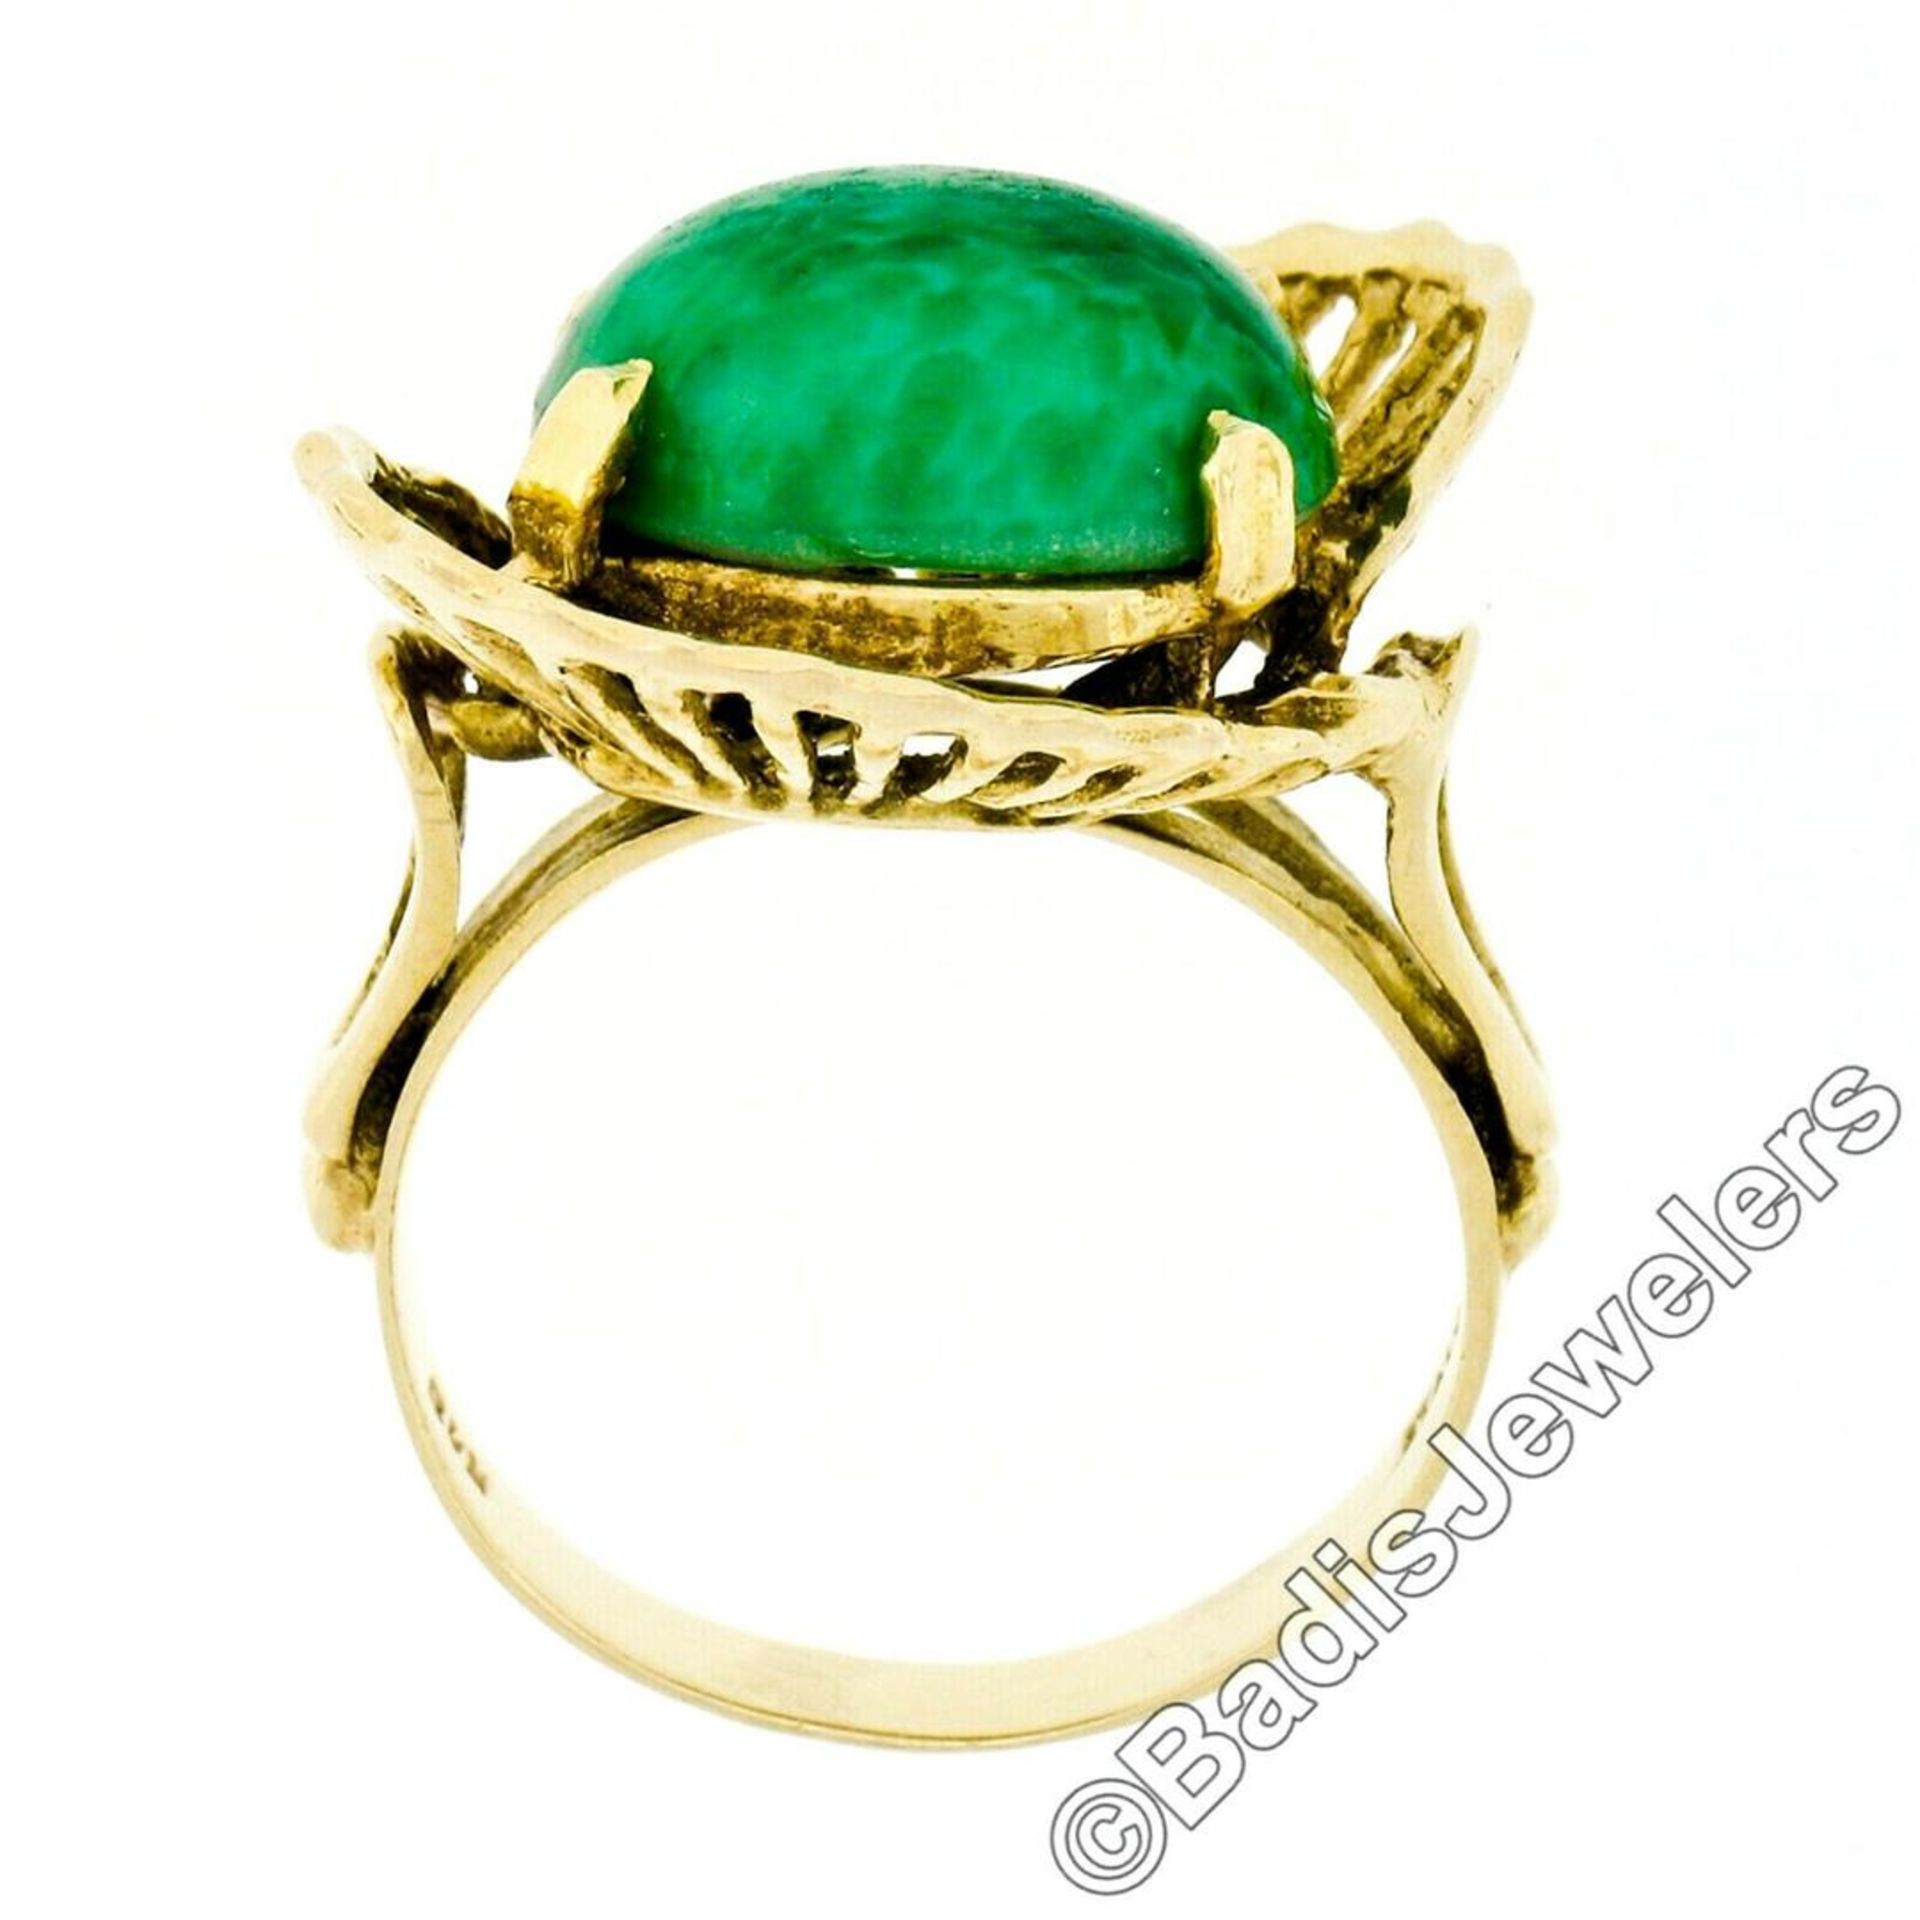 Vintage Handmade 18kt Yellow Gold Oval Jade Solitaire Ring - Image 7 of 8